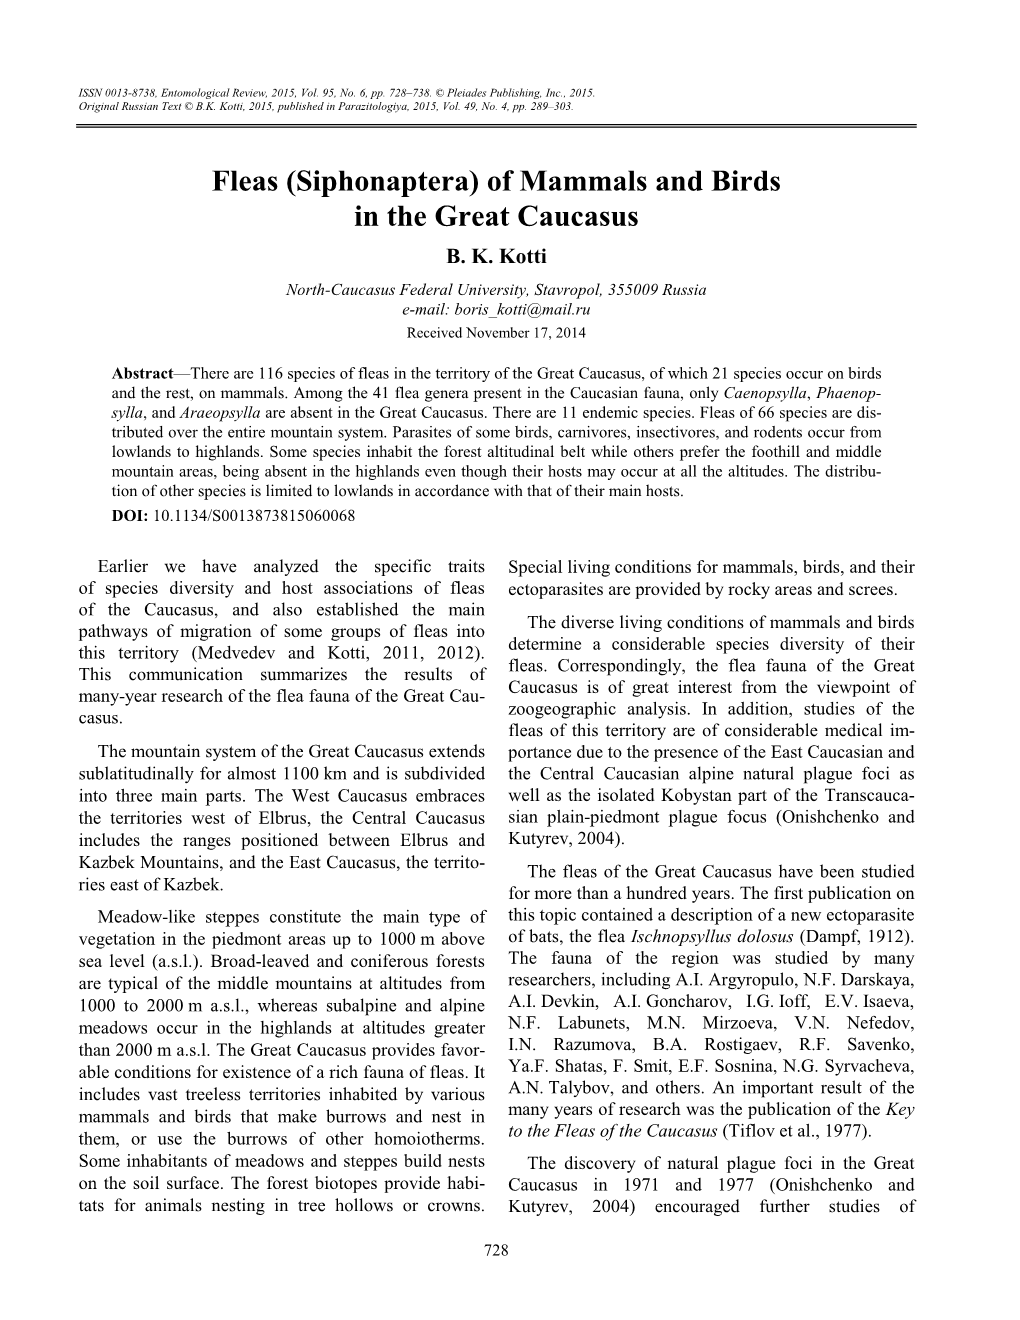 Fleas (Siphonaptera) of Mammals and Birds in the Great Caucasus B